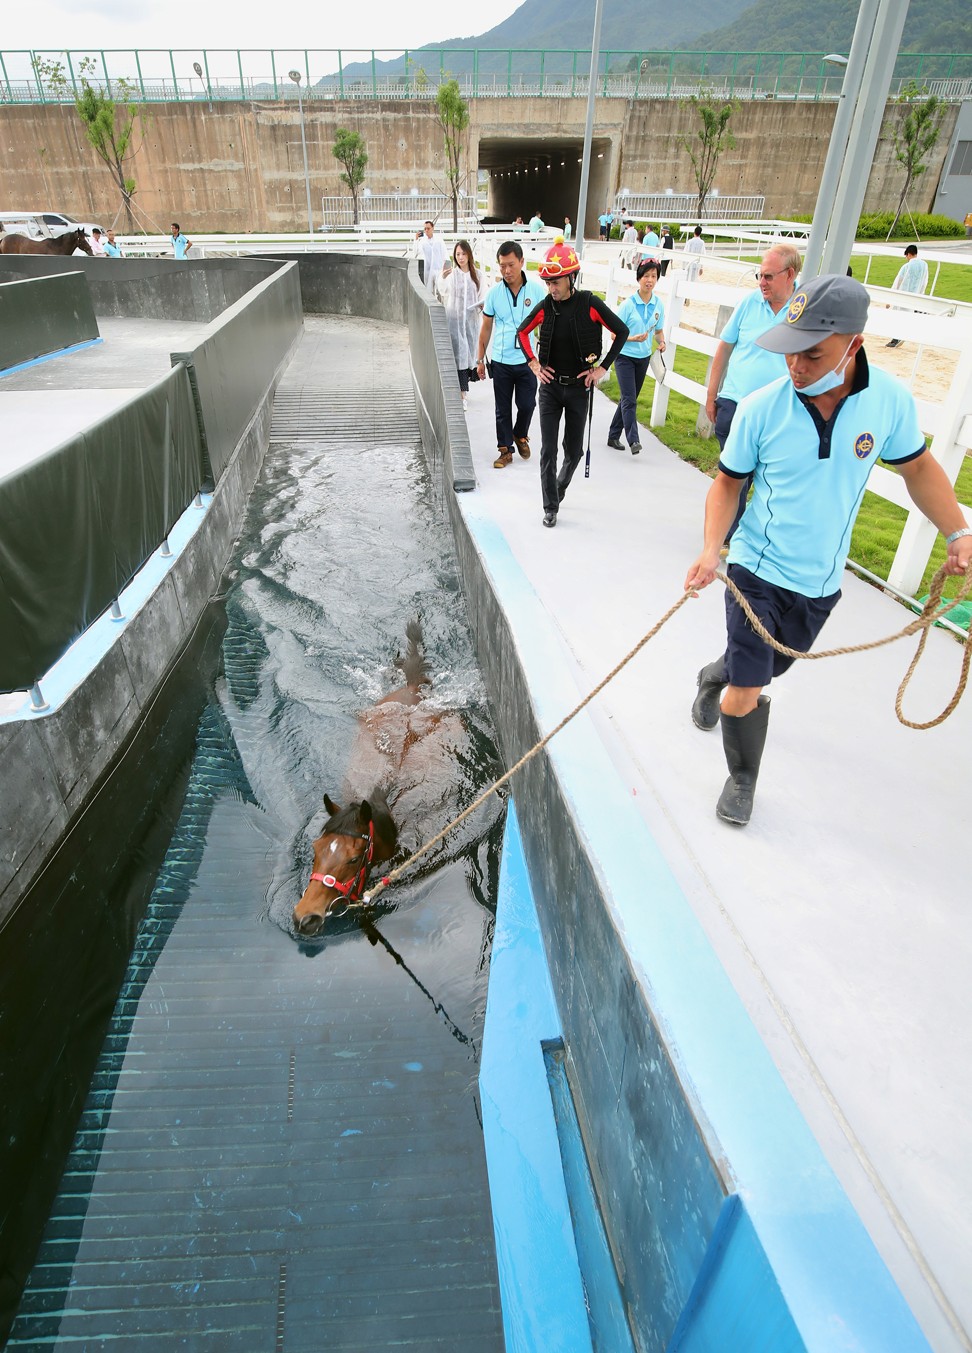 Staff taking horses through the pool at the Conghua training facility. Photo: HKJC